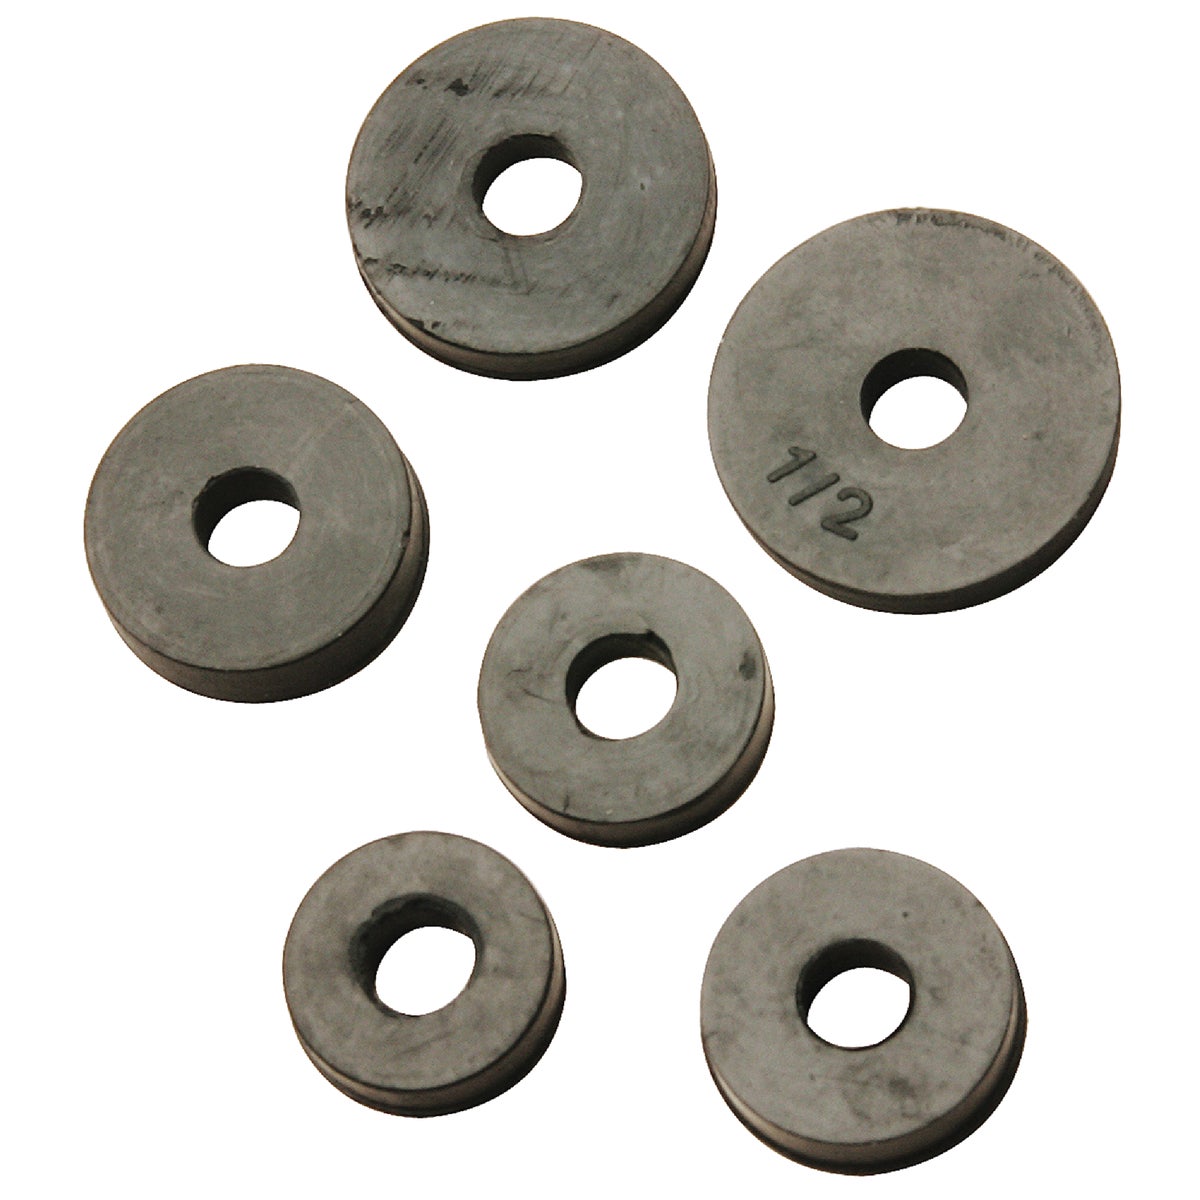 Item 400685, Contains 6 assorted size flat faucet washers